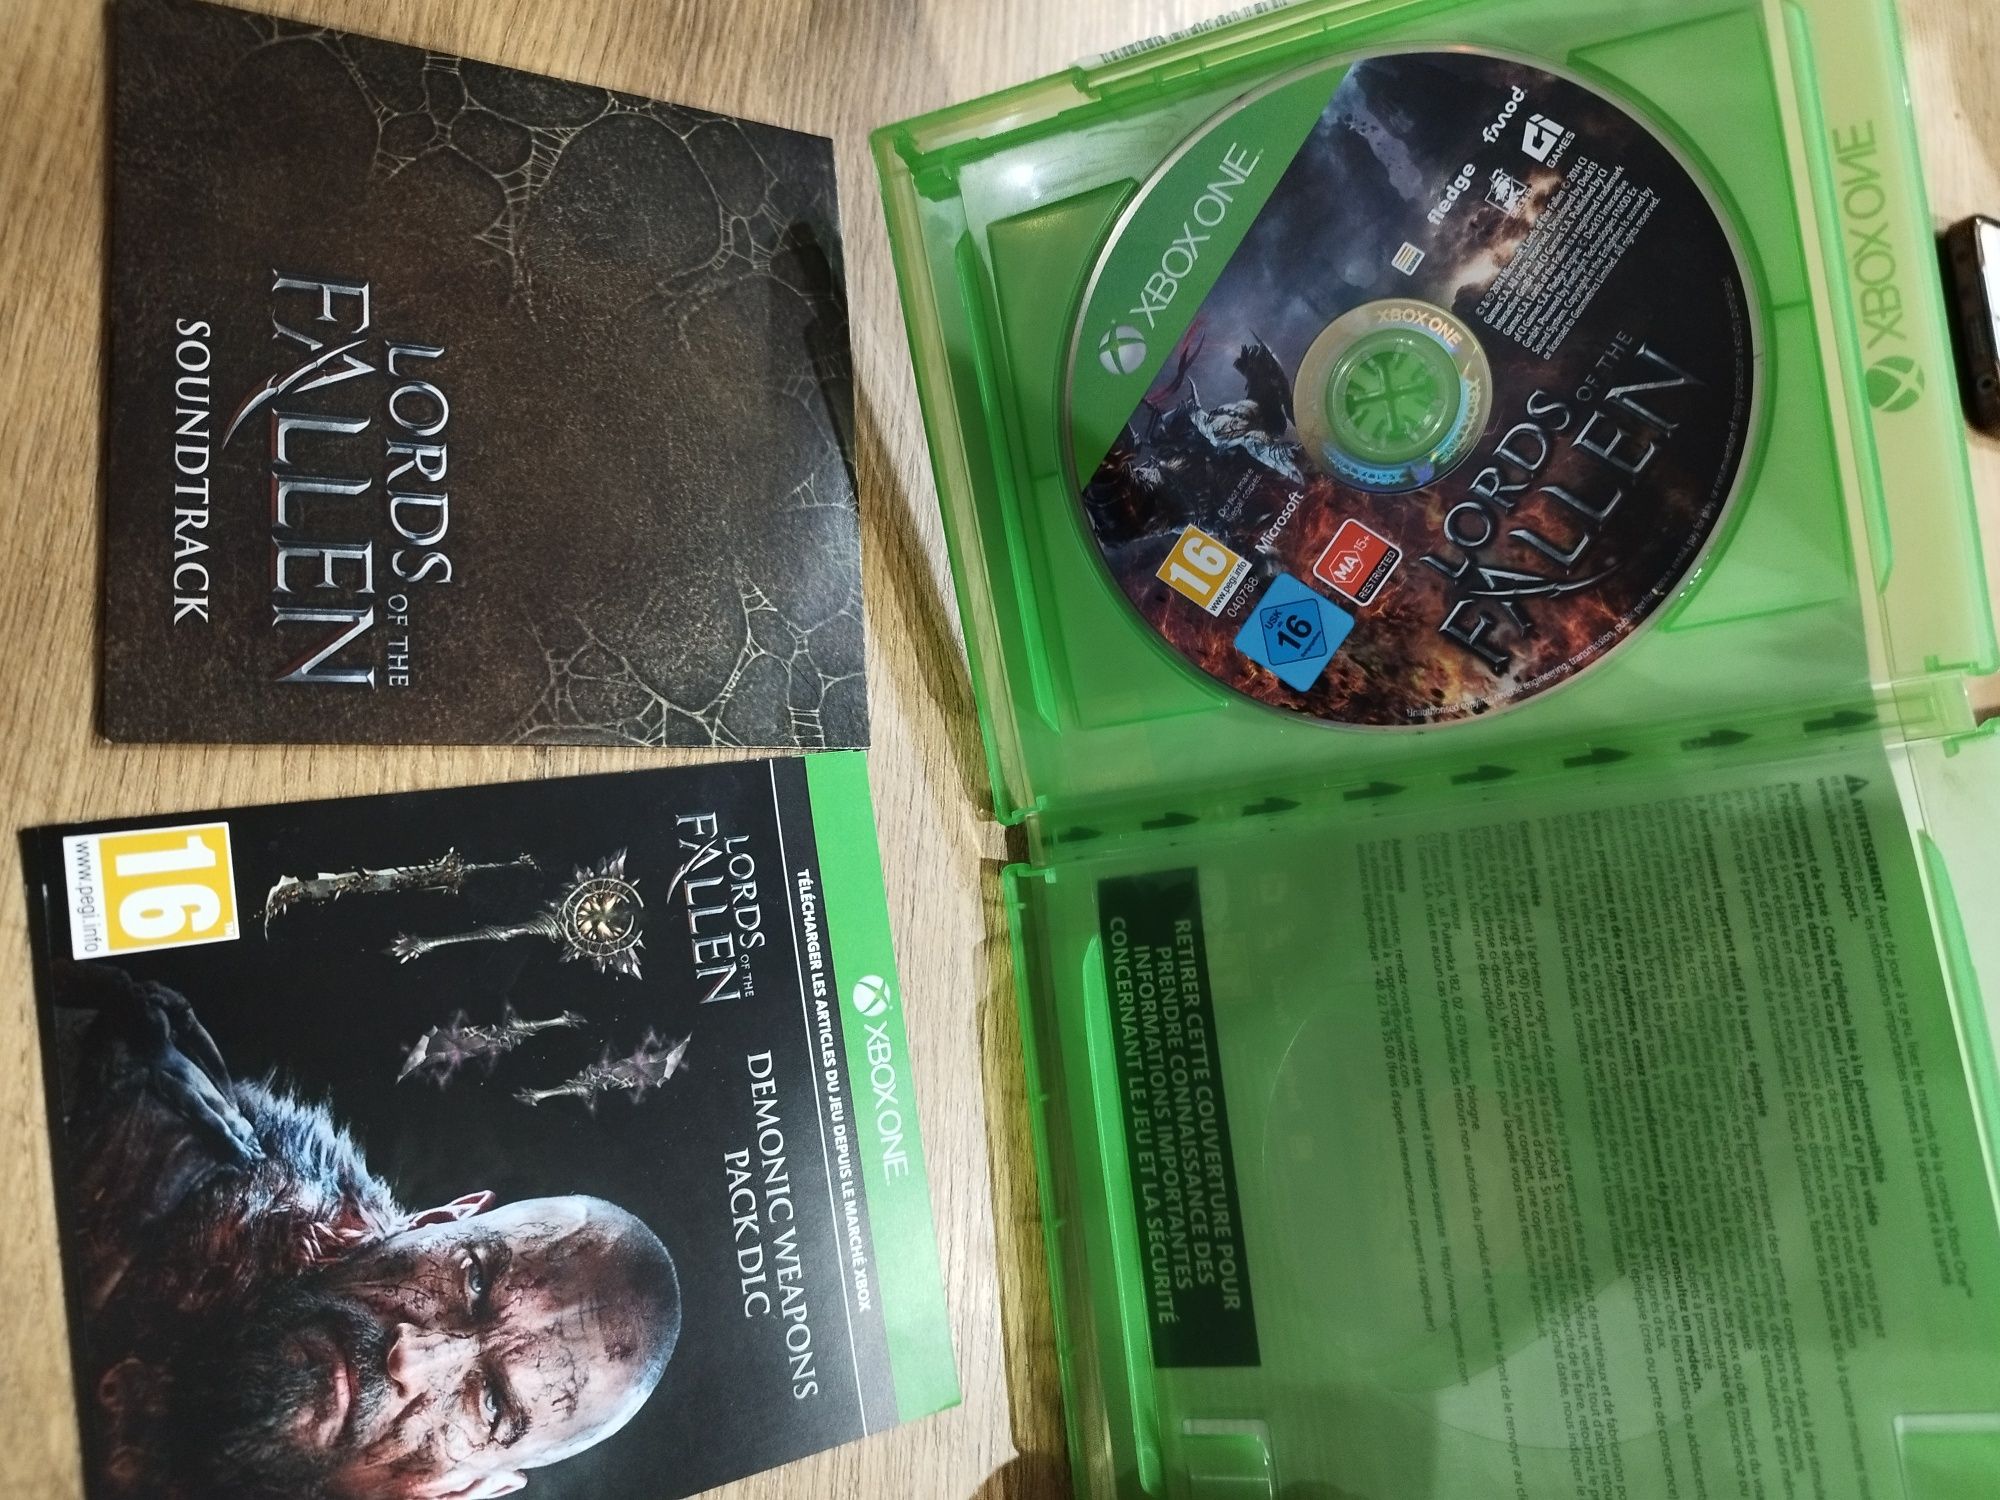 Lords of the Fallen xbox one Limited Edition One s series x. One x